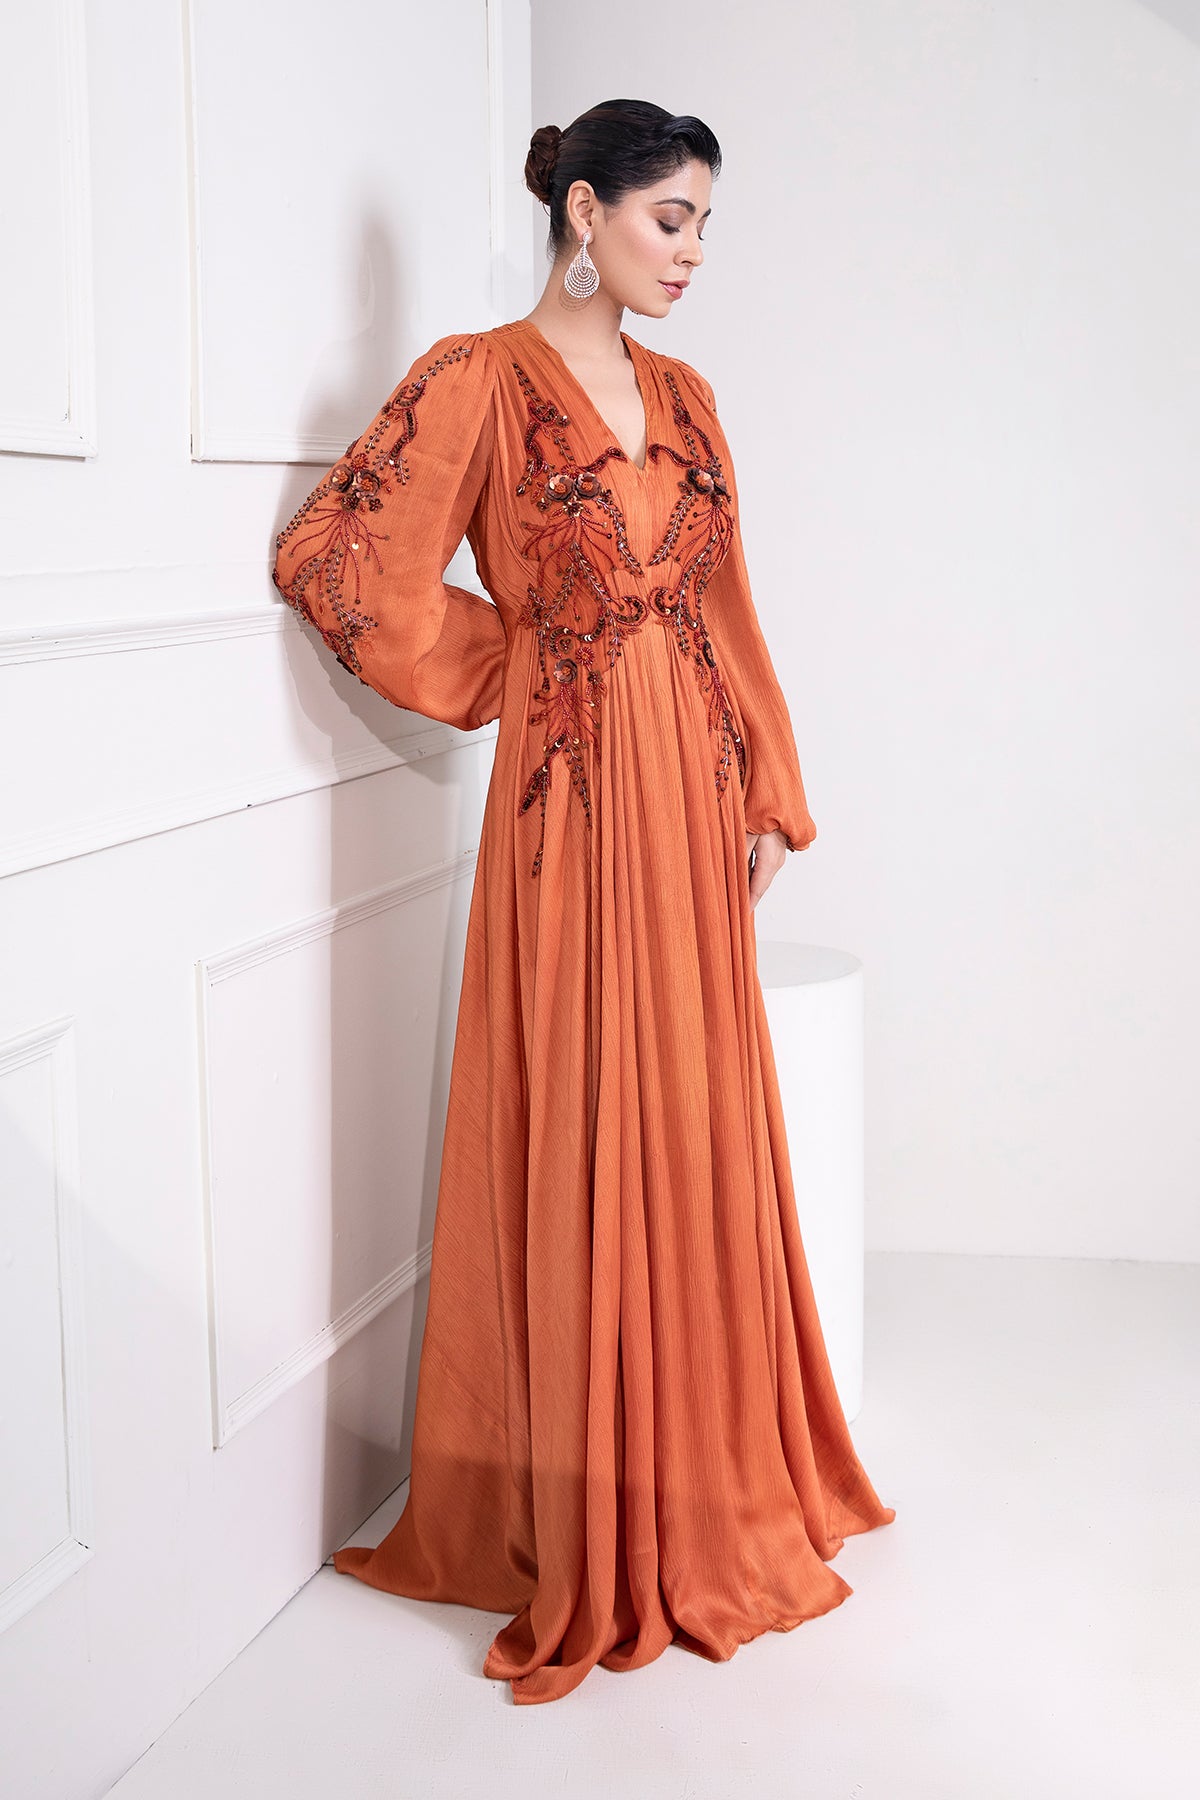 Brunt Orange draped flare gown with intricate tonal embroidery